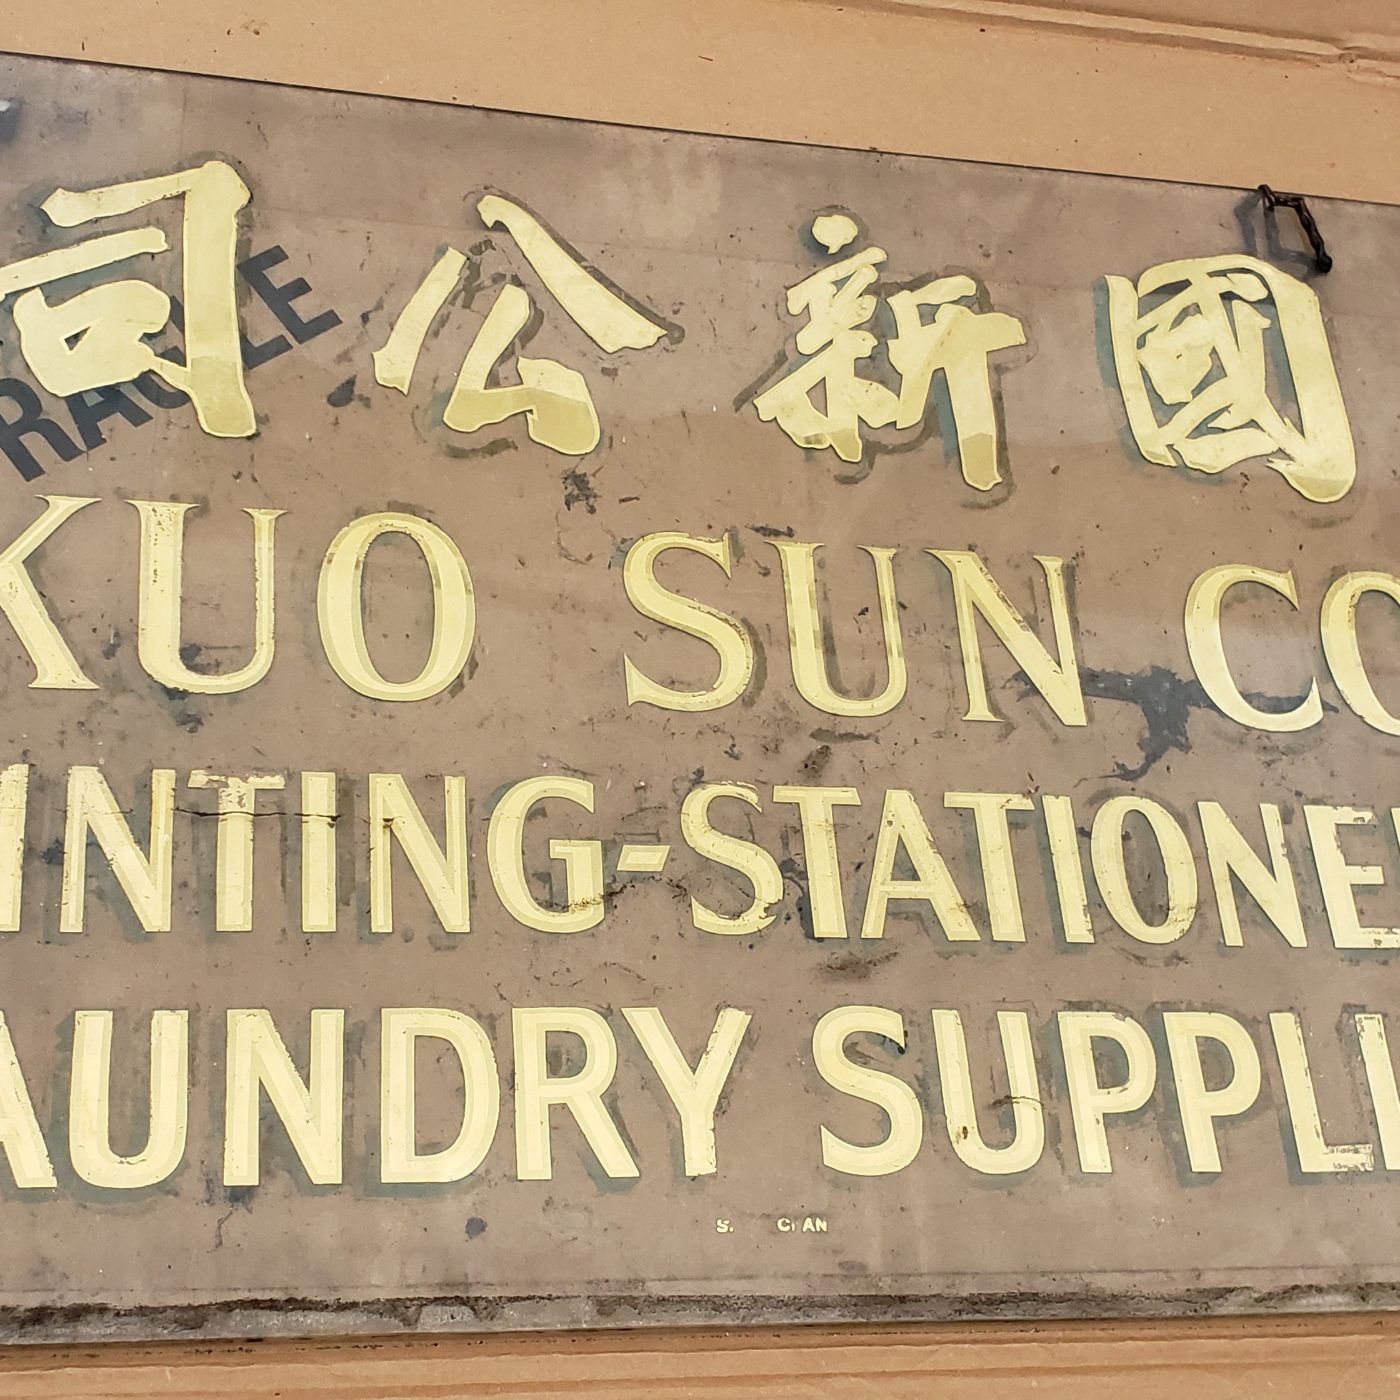 Kuo Sun Co. glass sign. Courtesy of Good Jean Lau. Museum of Chinese in America (MOCA) Collection.